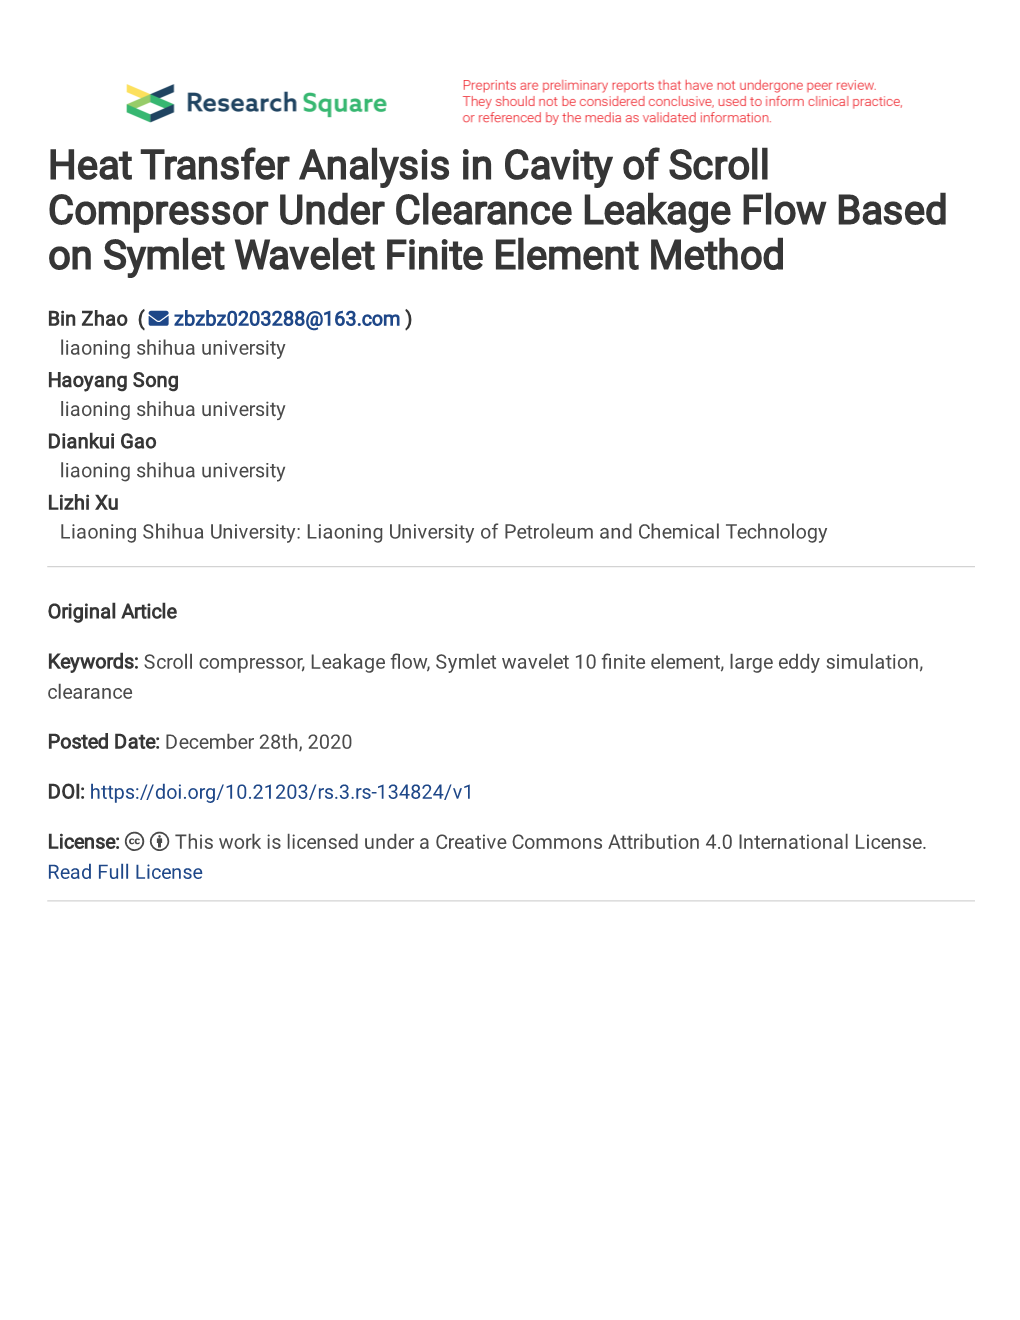 Heat Transfer Analysis in Cavity of Scroll Compressor Under Clearance Leakage Flow Based on Symlet Wavelet Finite Element Method